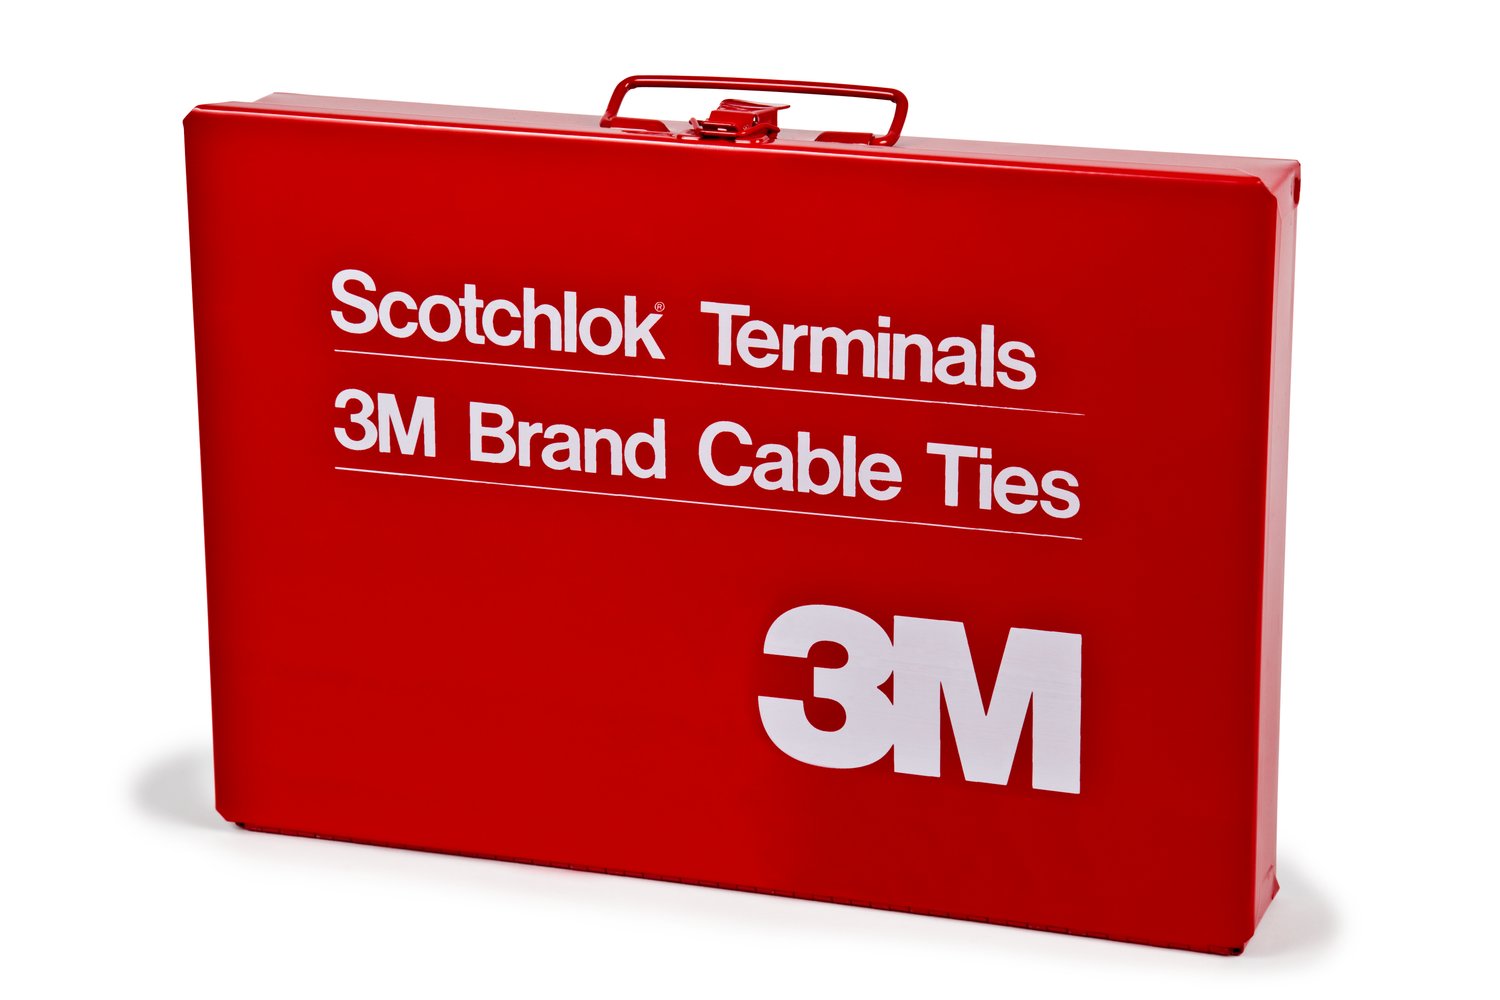 7100164198 - 3M Scotchlok Steel Empty Terminal Box, Red, made of steel for
durability, 6/Case